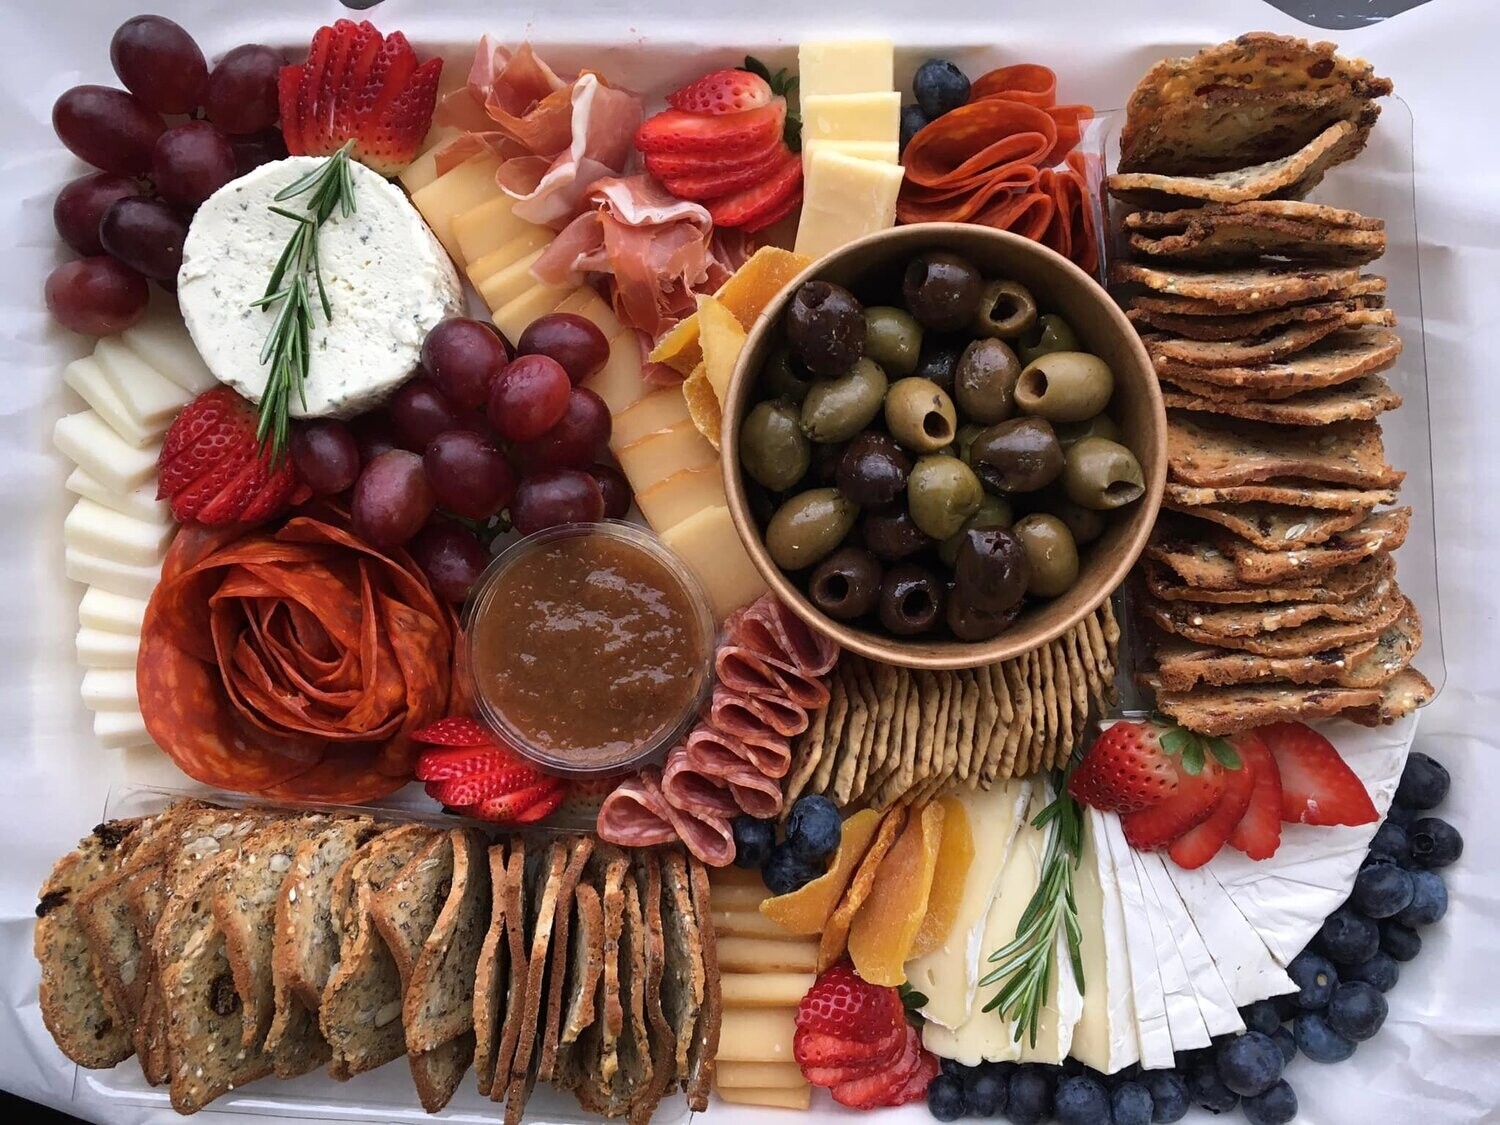 Charcuterie Board - 2 Sizes Vegan Options Available